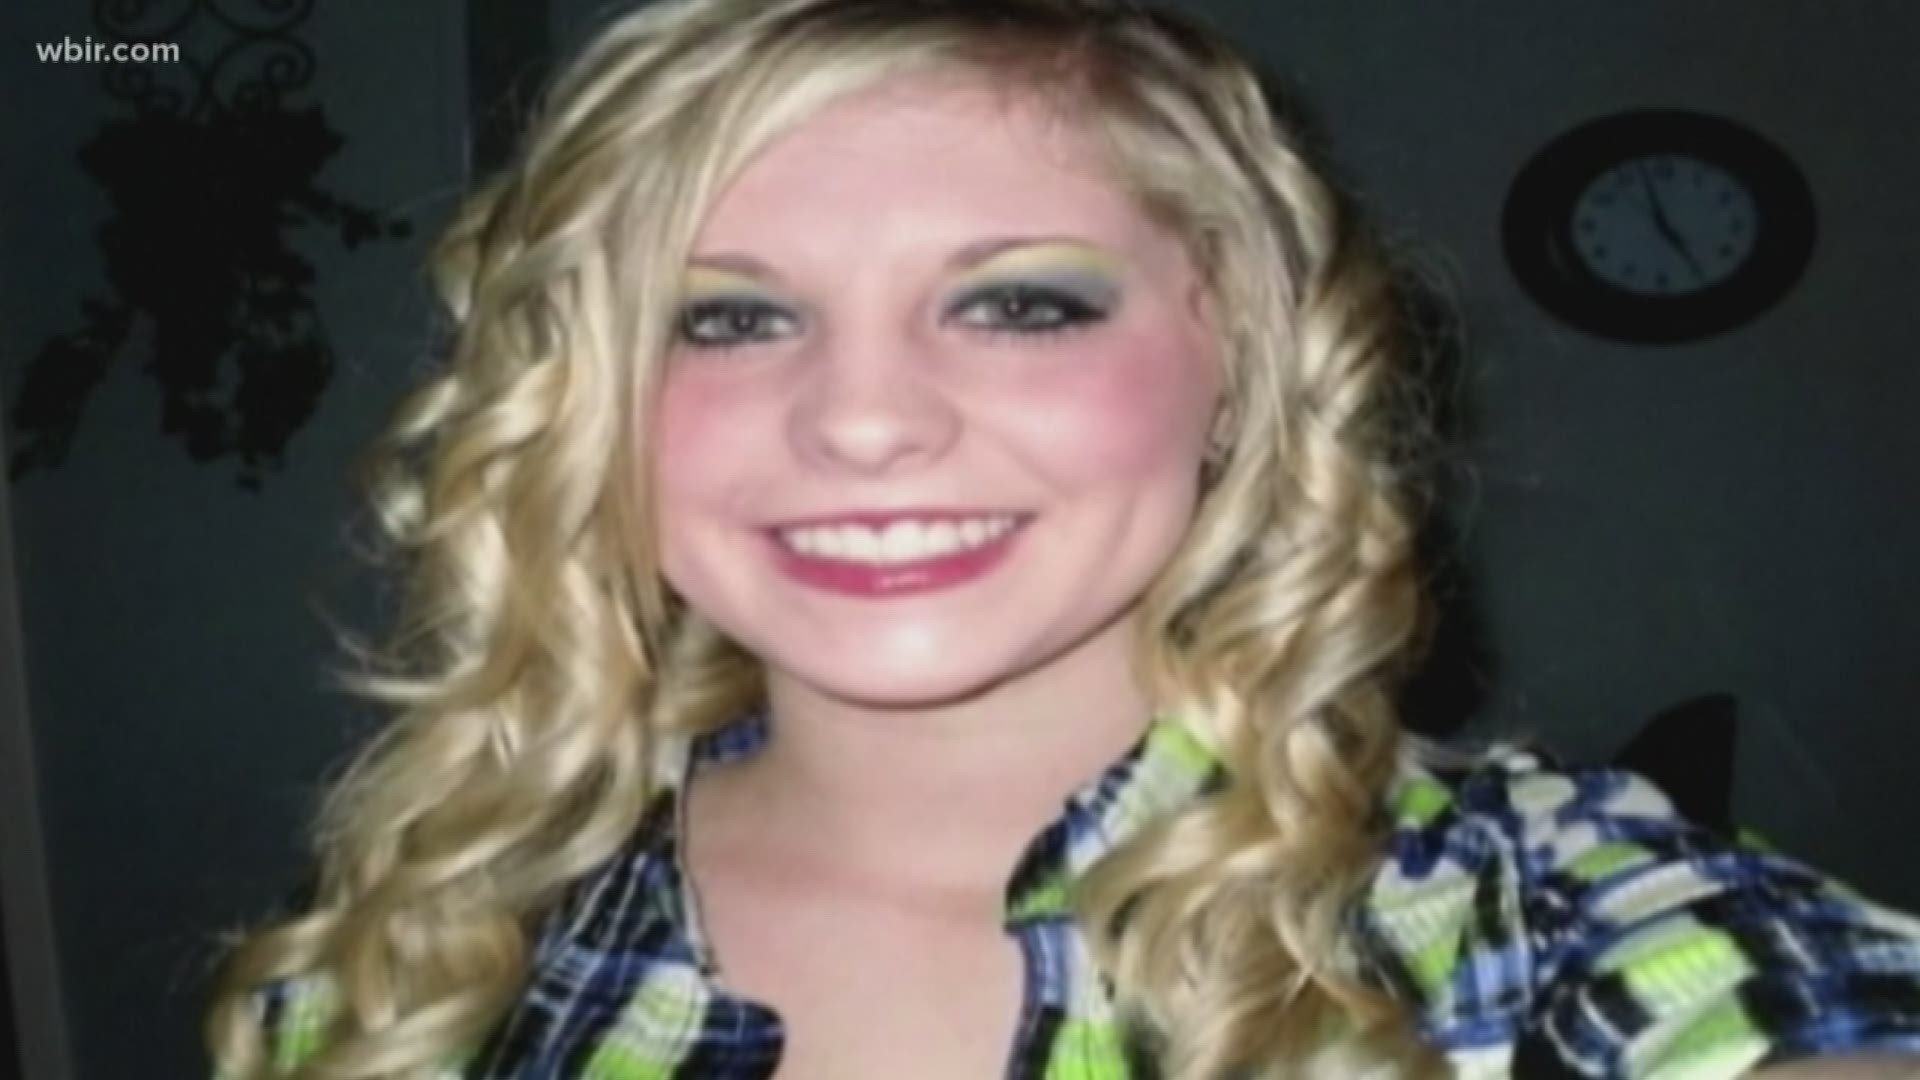 Holly Bobo was laid to rest this weekend, more than six years after her disappearance.